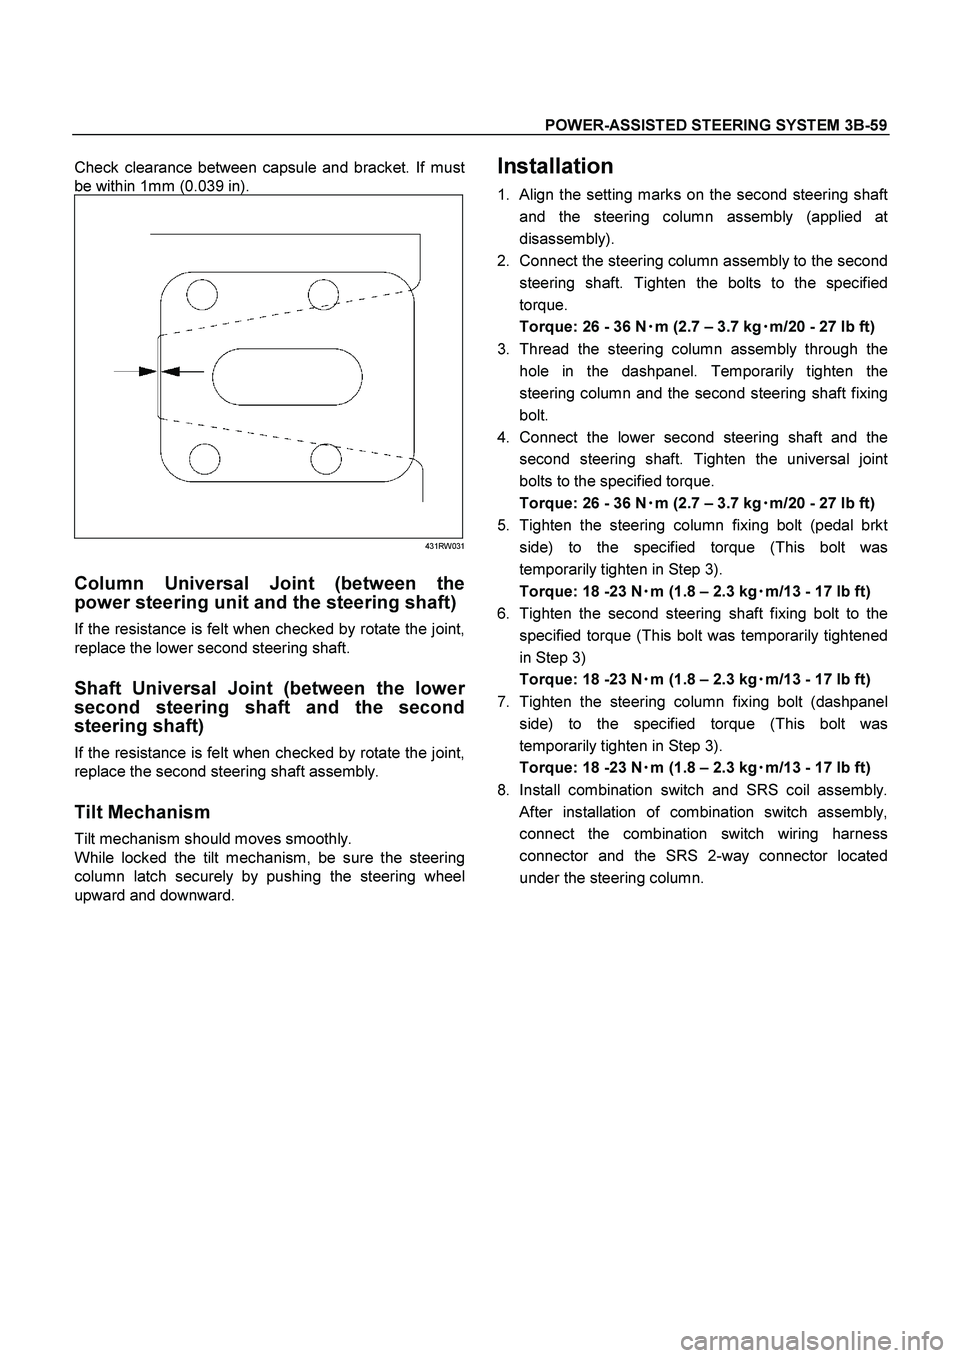 ISUZU TF SERIES 2004  Workshop Manual POWER-ASSISTED STEERING SYSTEM 3B-59
 
Check clearance between capsule and bracket. If must
be within 1mm (0.039 in). 
431RW031
 
Column Universal Joint (between the
power steering unit and the steeri